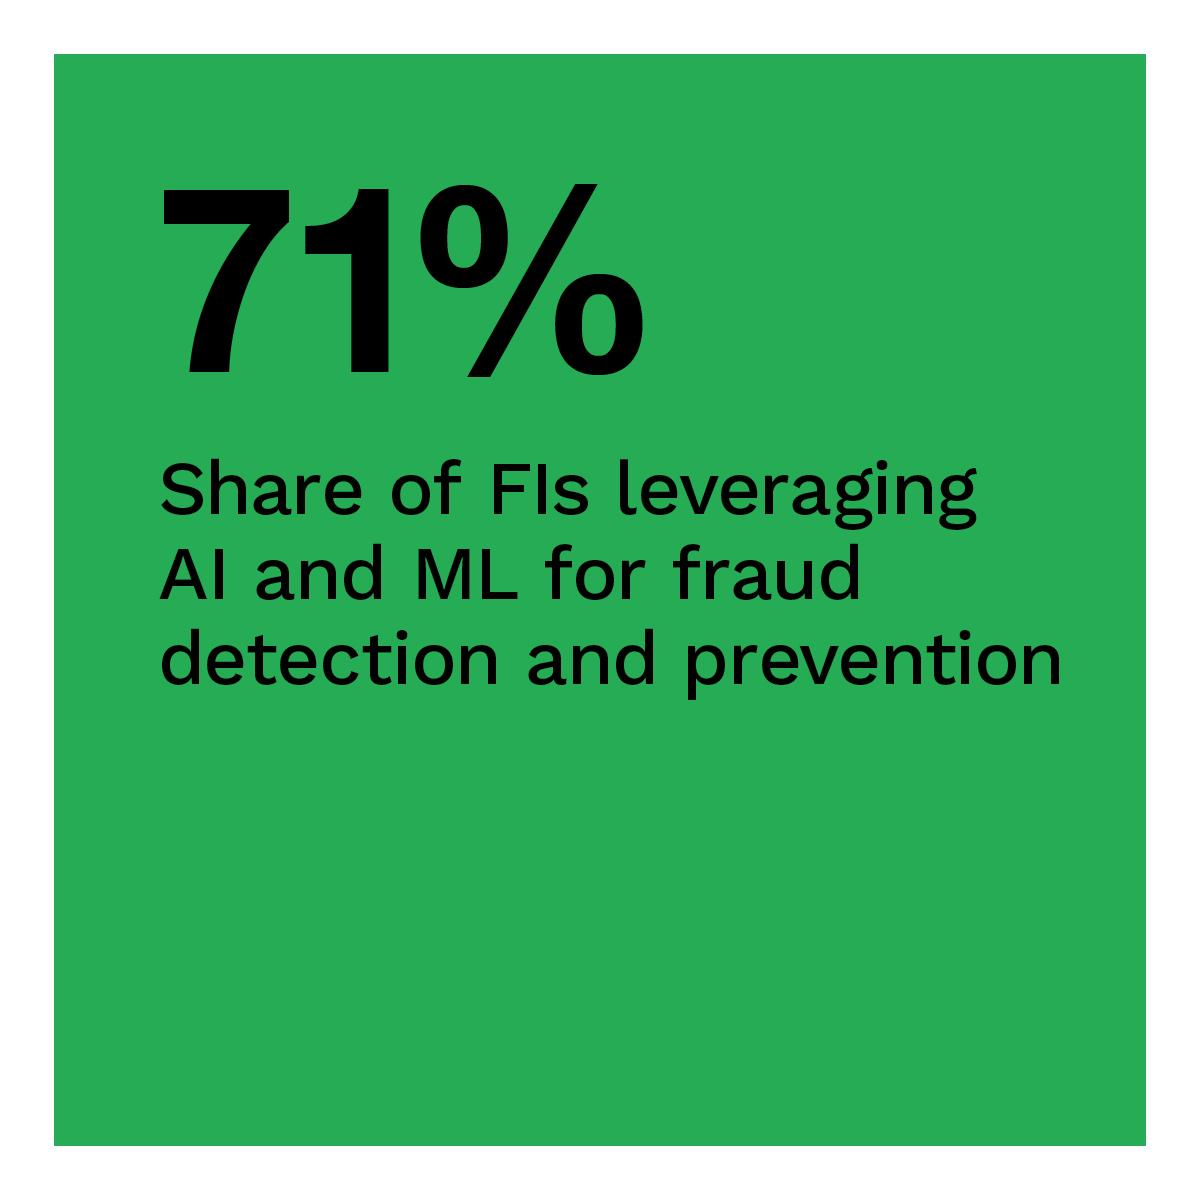 71%: Share of FIs leveraging AI and ML for fraud detection and prevention